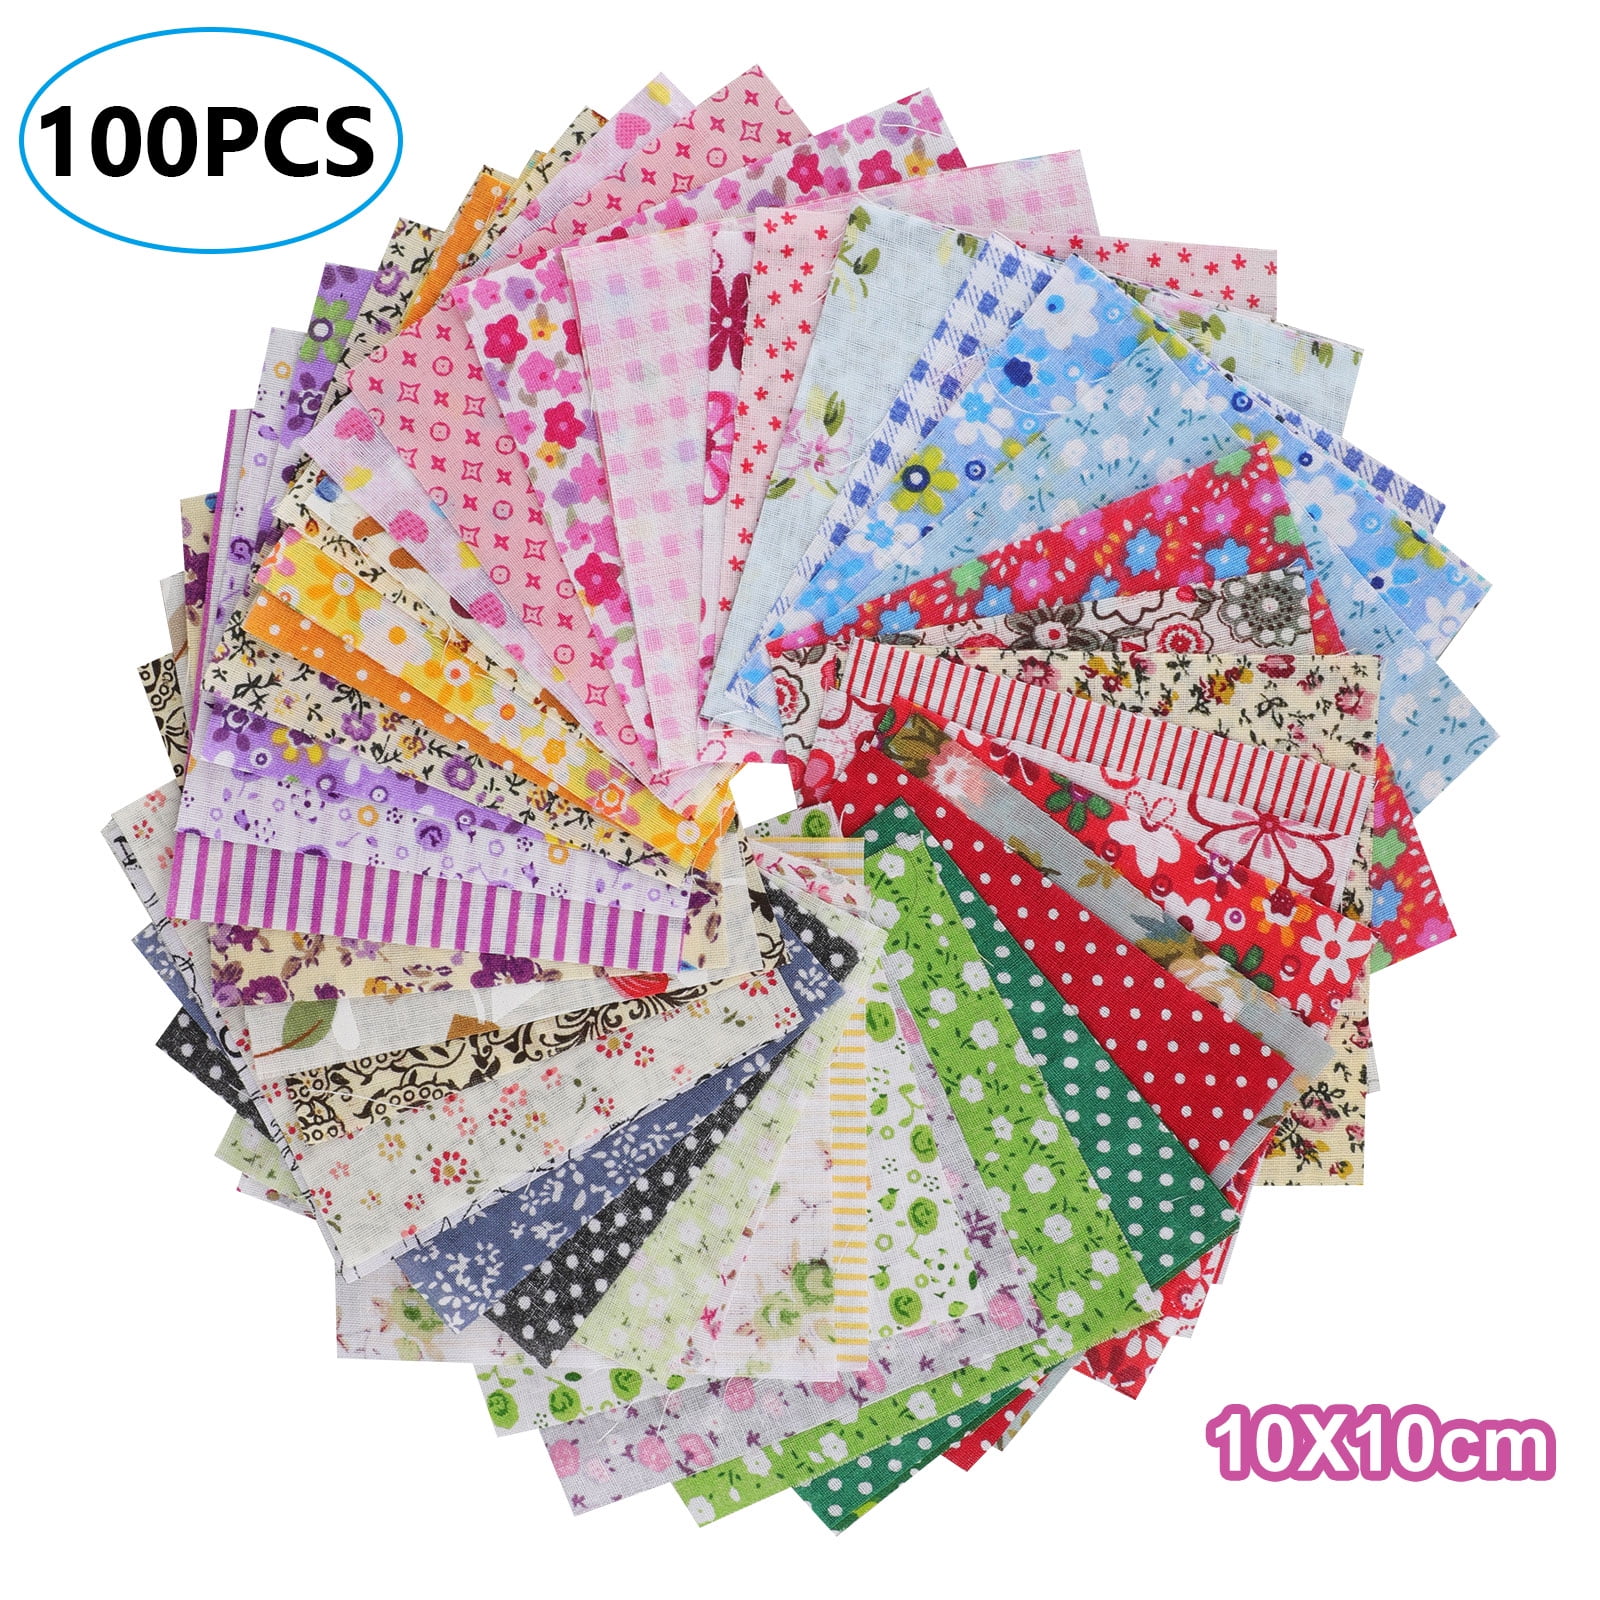 4pcs 9.8inchX9.8inch (25cmx25cm) Cotton Fabric Squares Quilting Sewing  Floral Precut Fabric Square Sheets For Craft Patchwork DIY Crafts